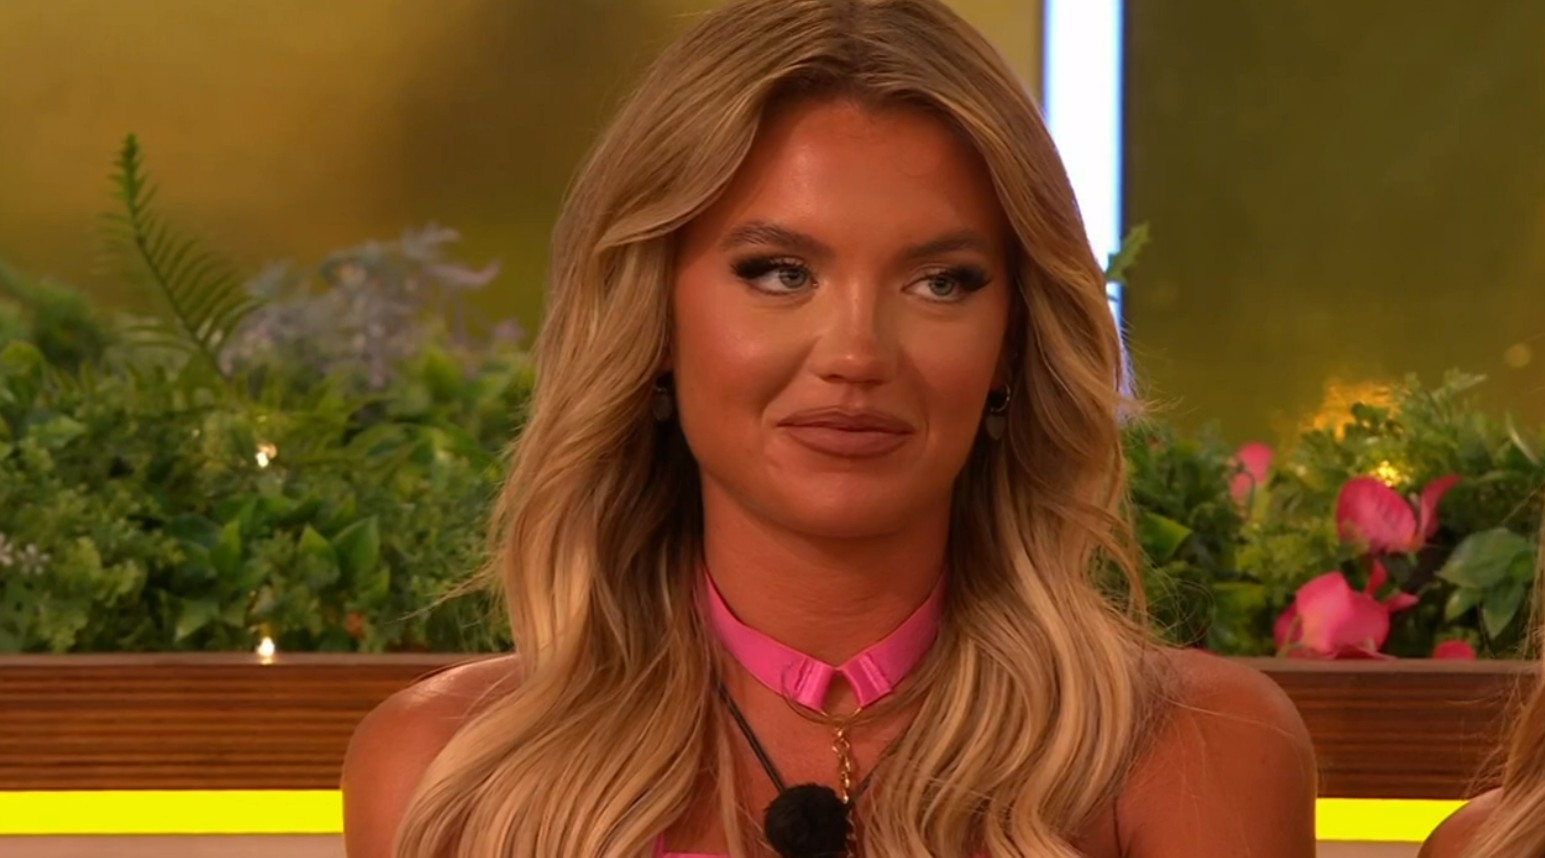 Love Island fans spot ‘proof’ Callum and Molly will reunite after ‘clue’ in final seconds of show